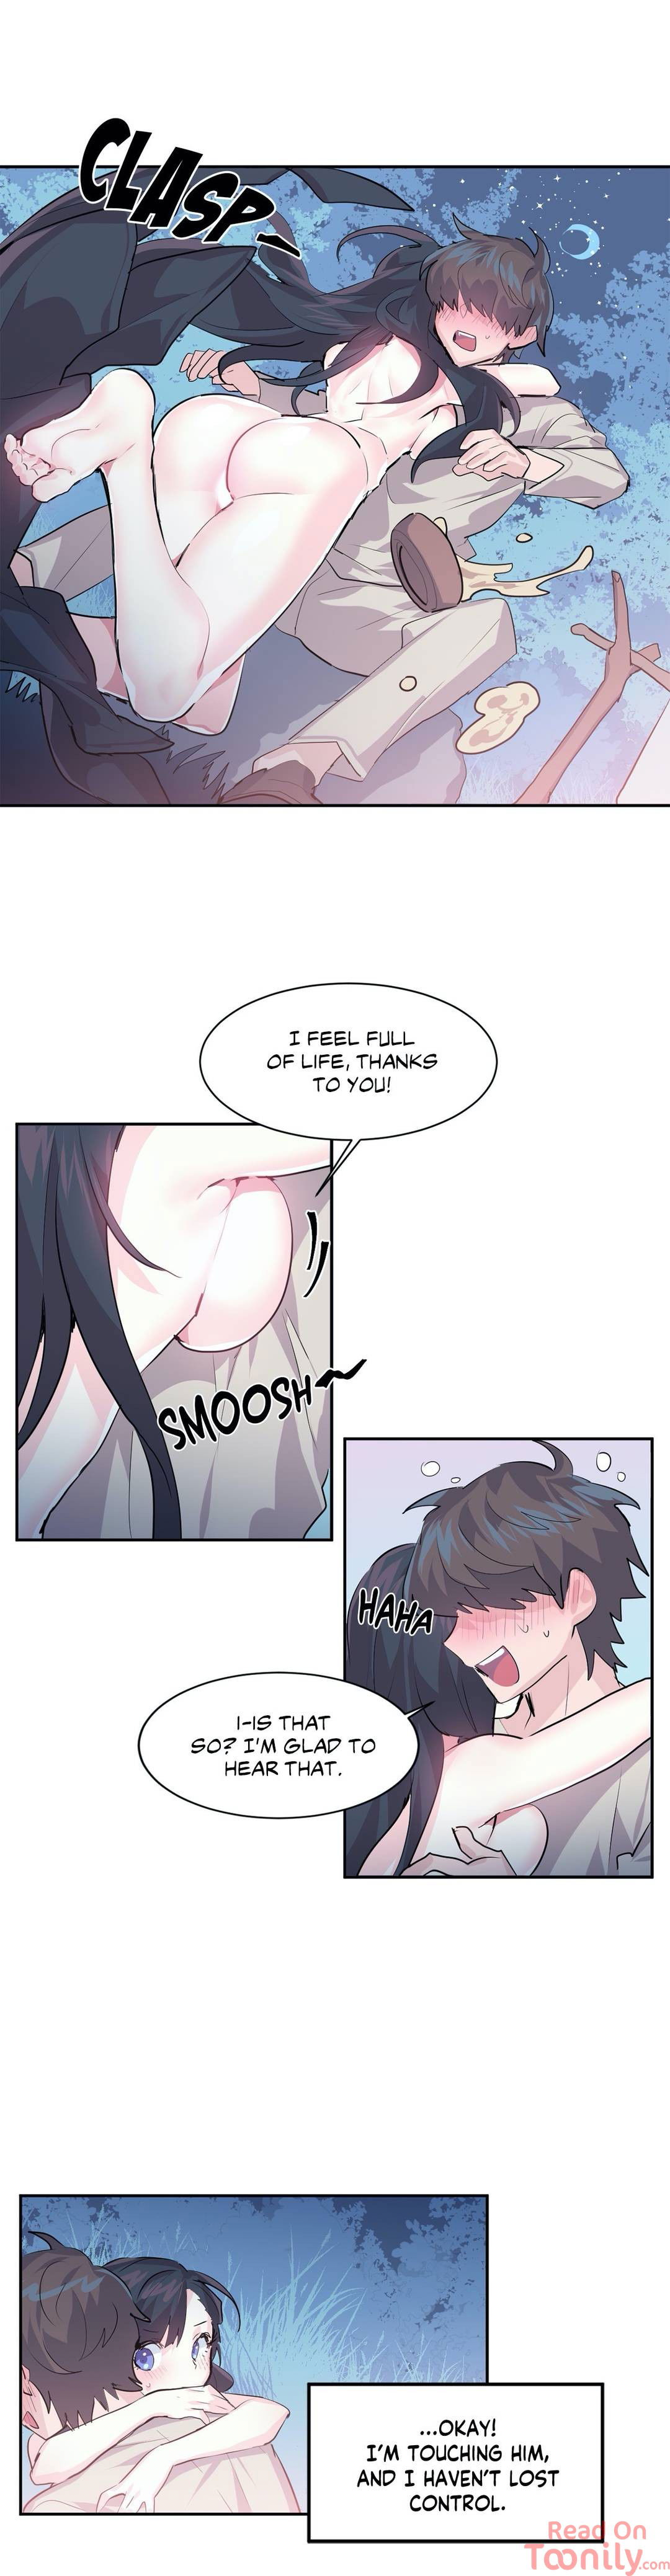 log-in-to-lust-a-land-chap-3-21